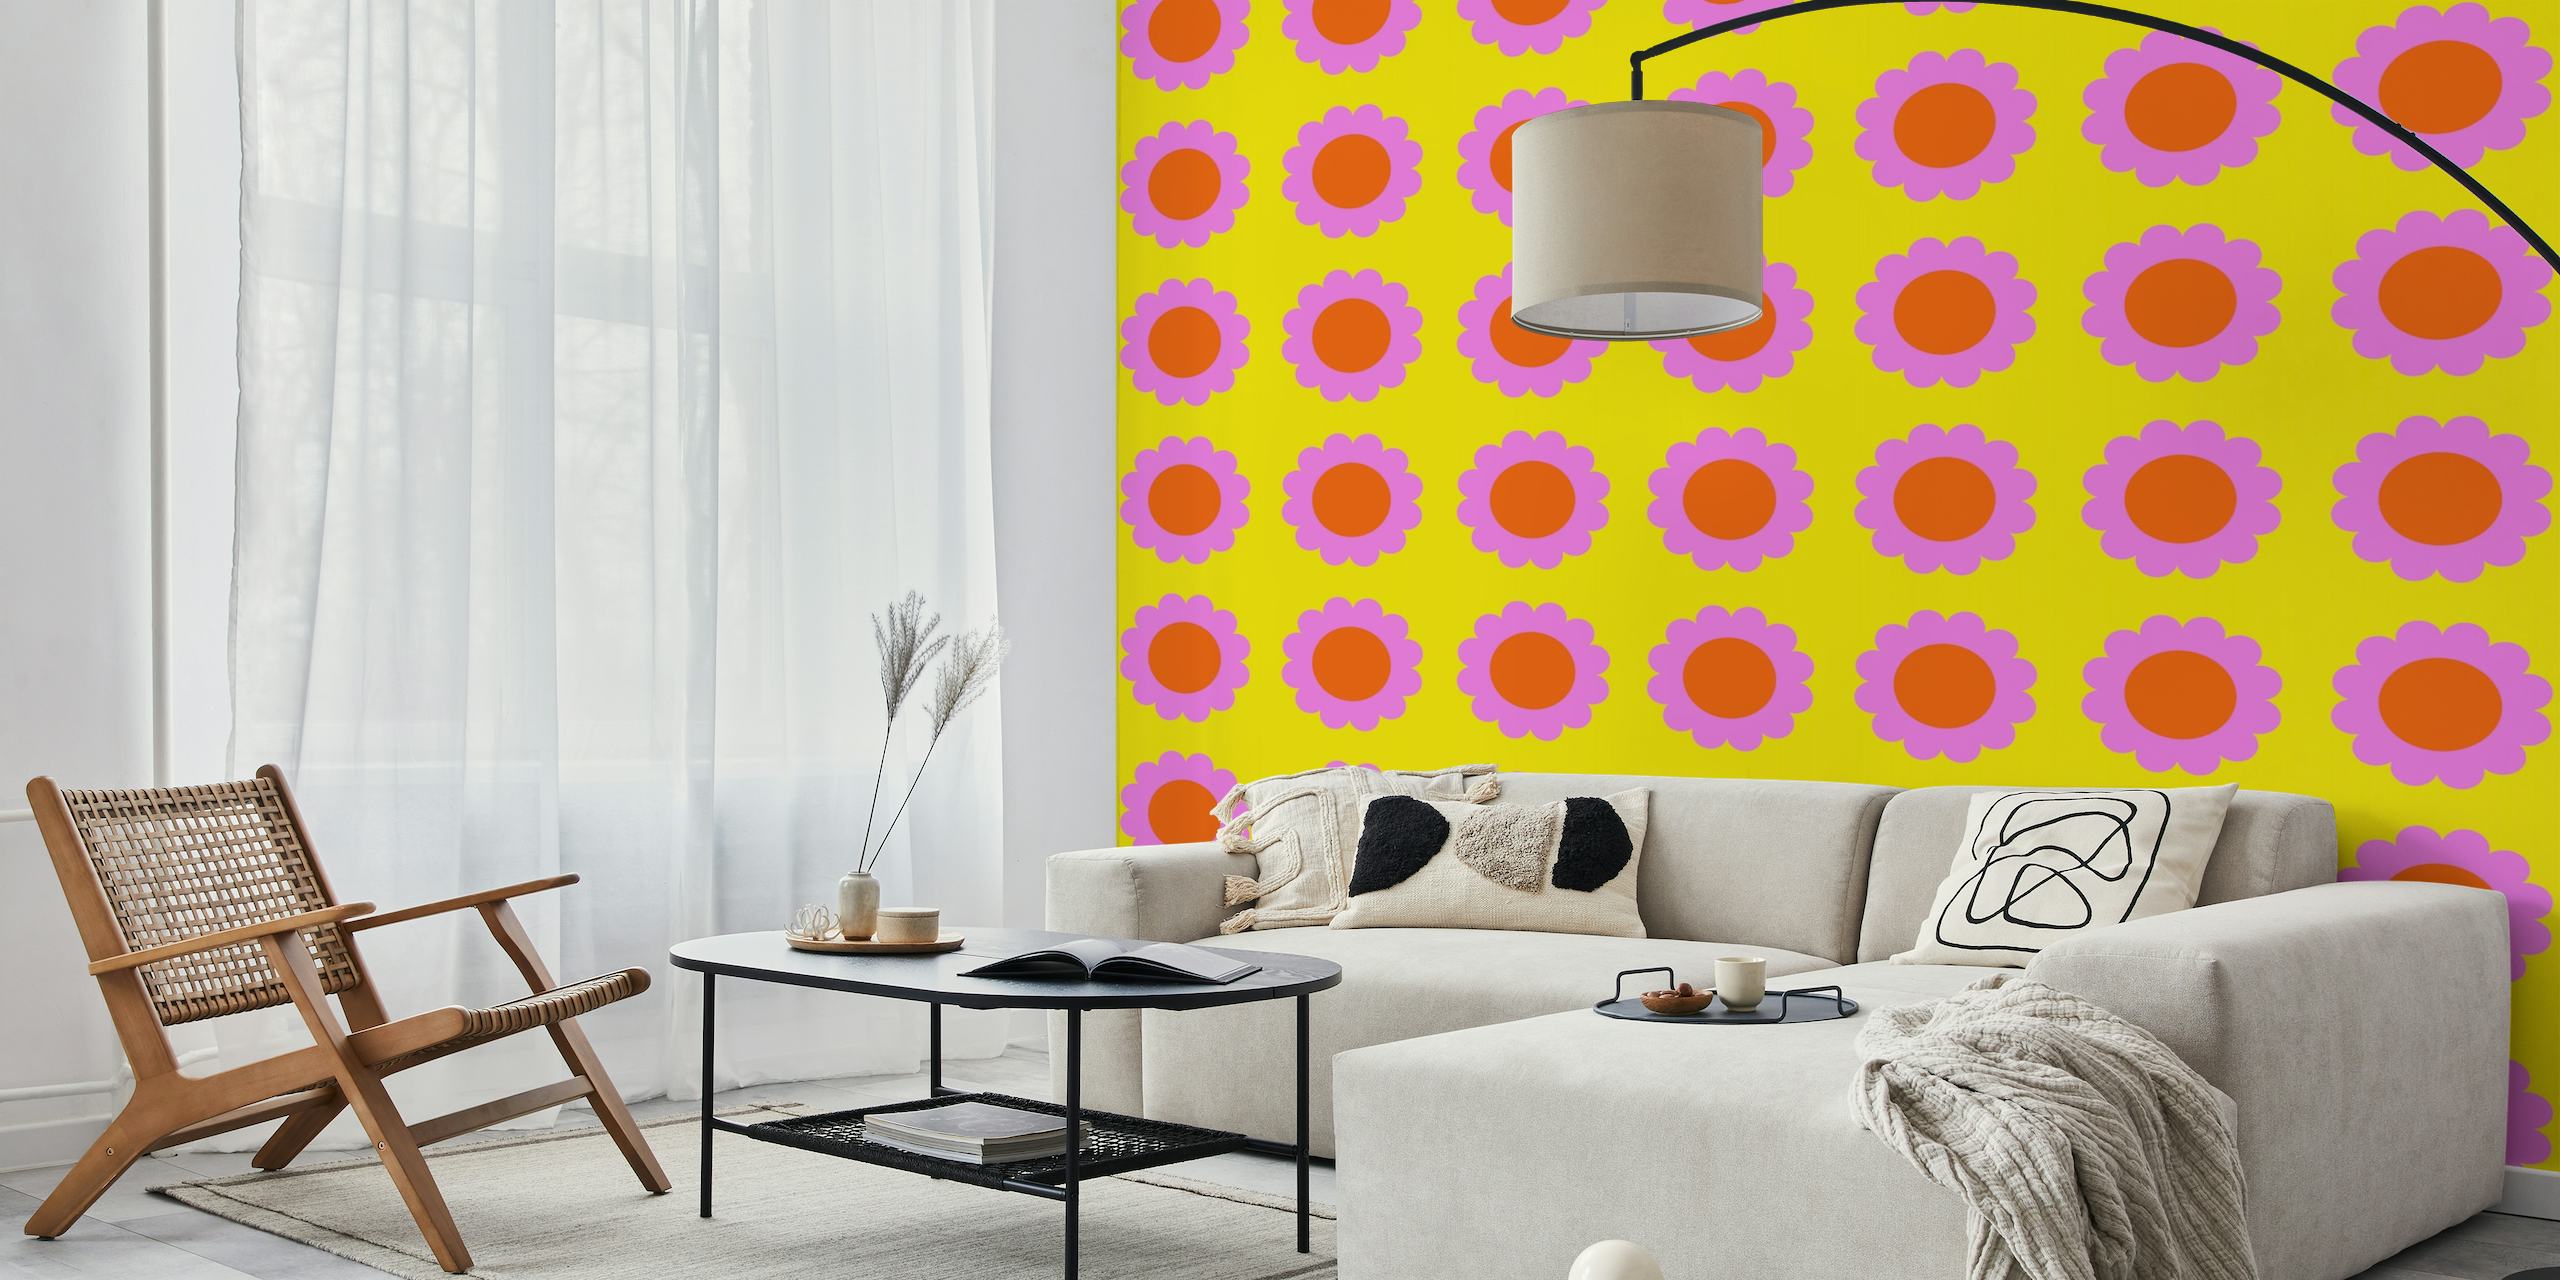 A bold, retro-style wall mural featuring pink and orange flowers on a bright yellow background.